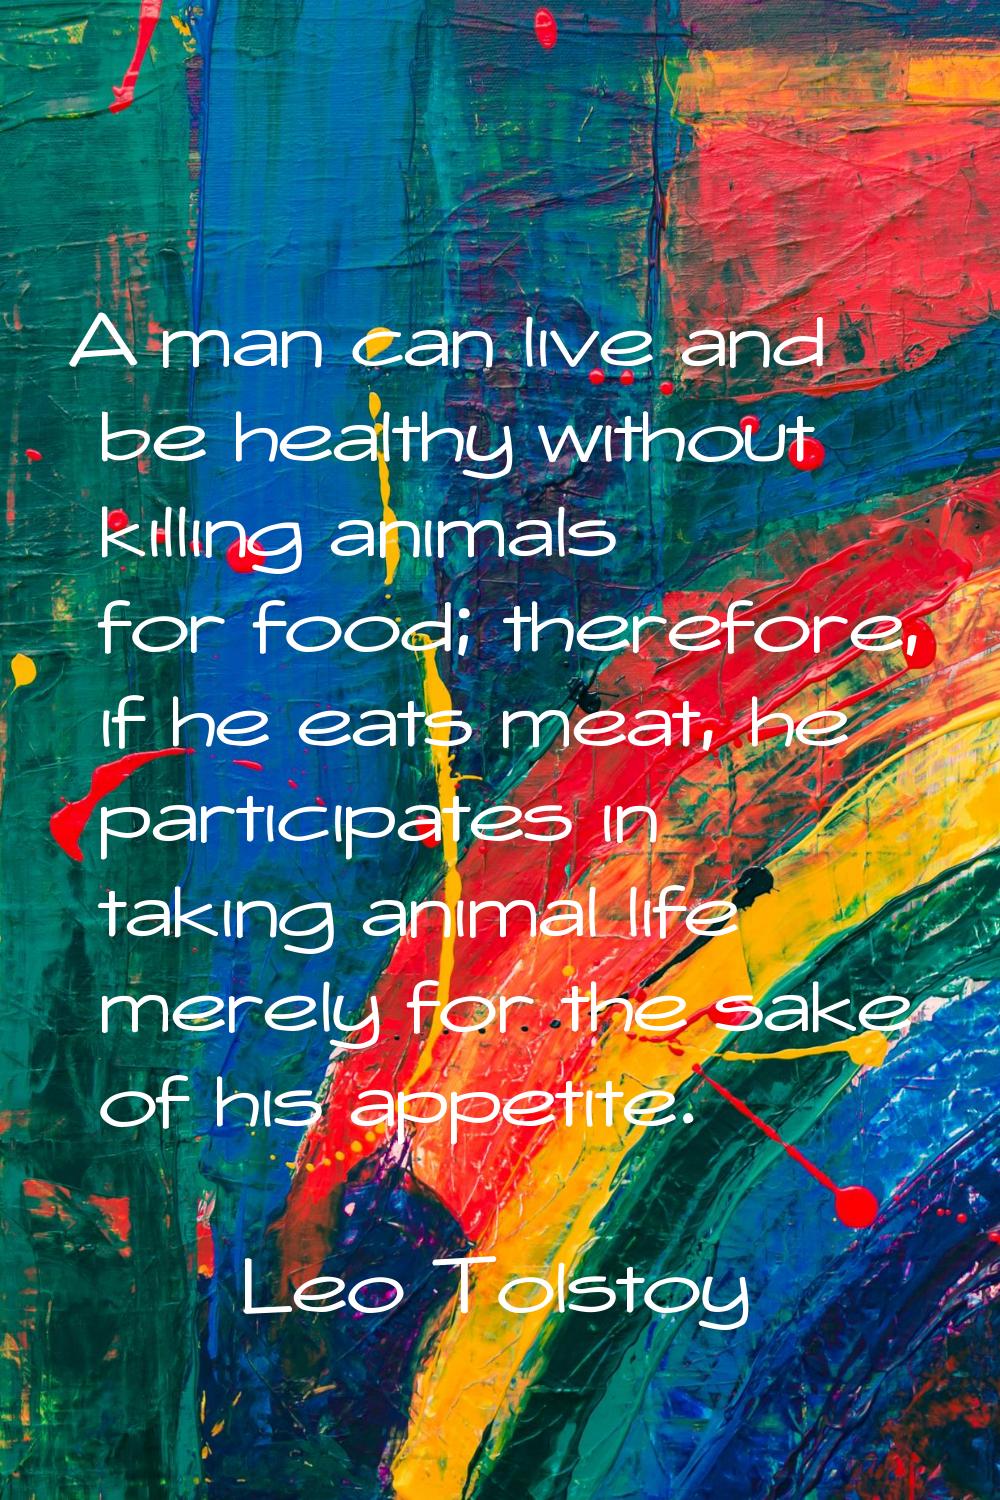 A man can live and be healthy without killing animals for food; therefore, if he eats meat, he part